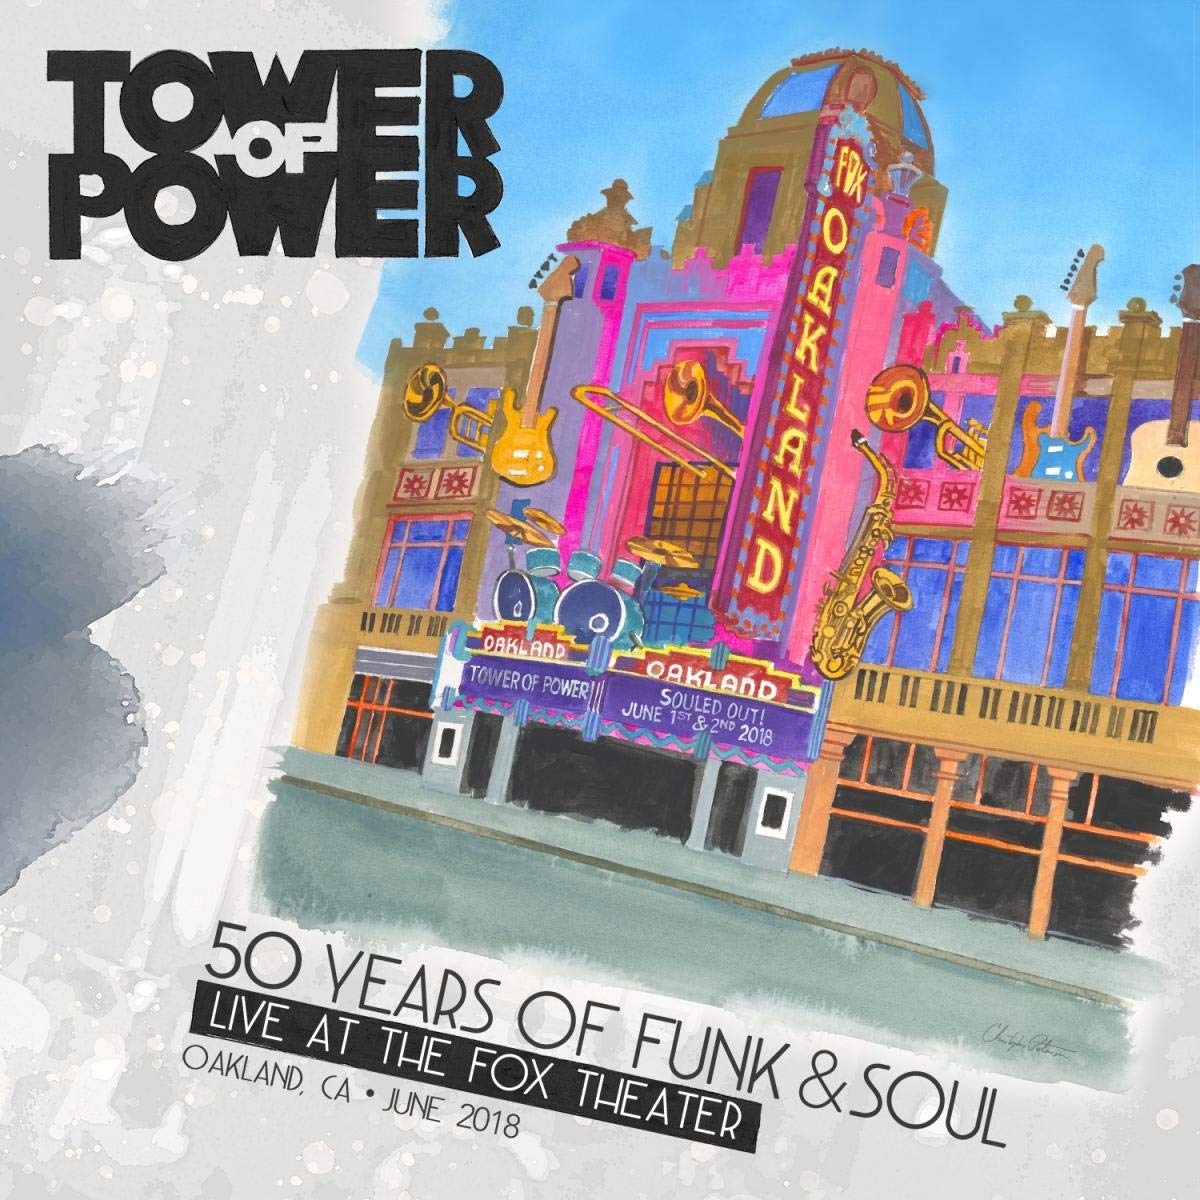 50 Years Of Funk & Soul: Live At The Fox Theater - Oakland, CA - June 2018